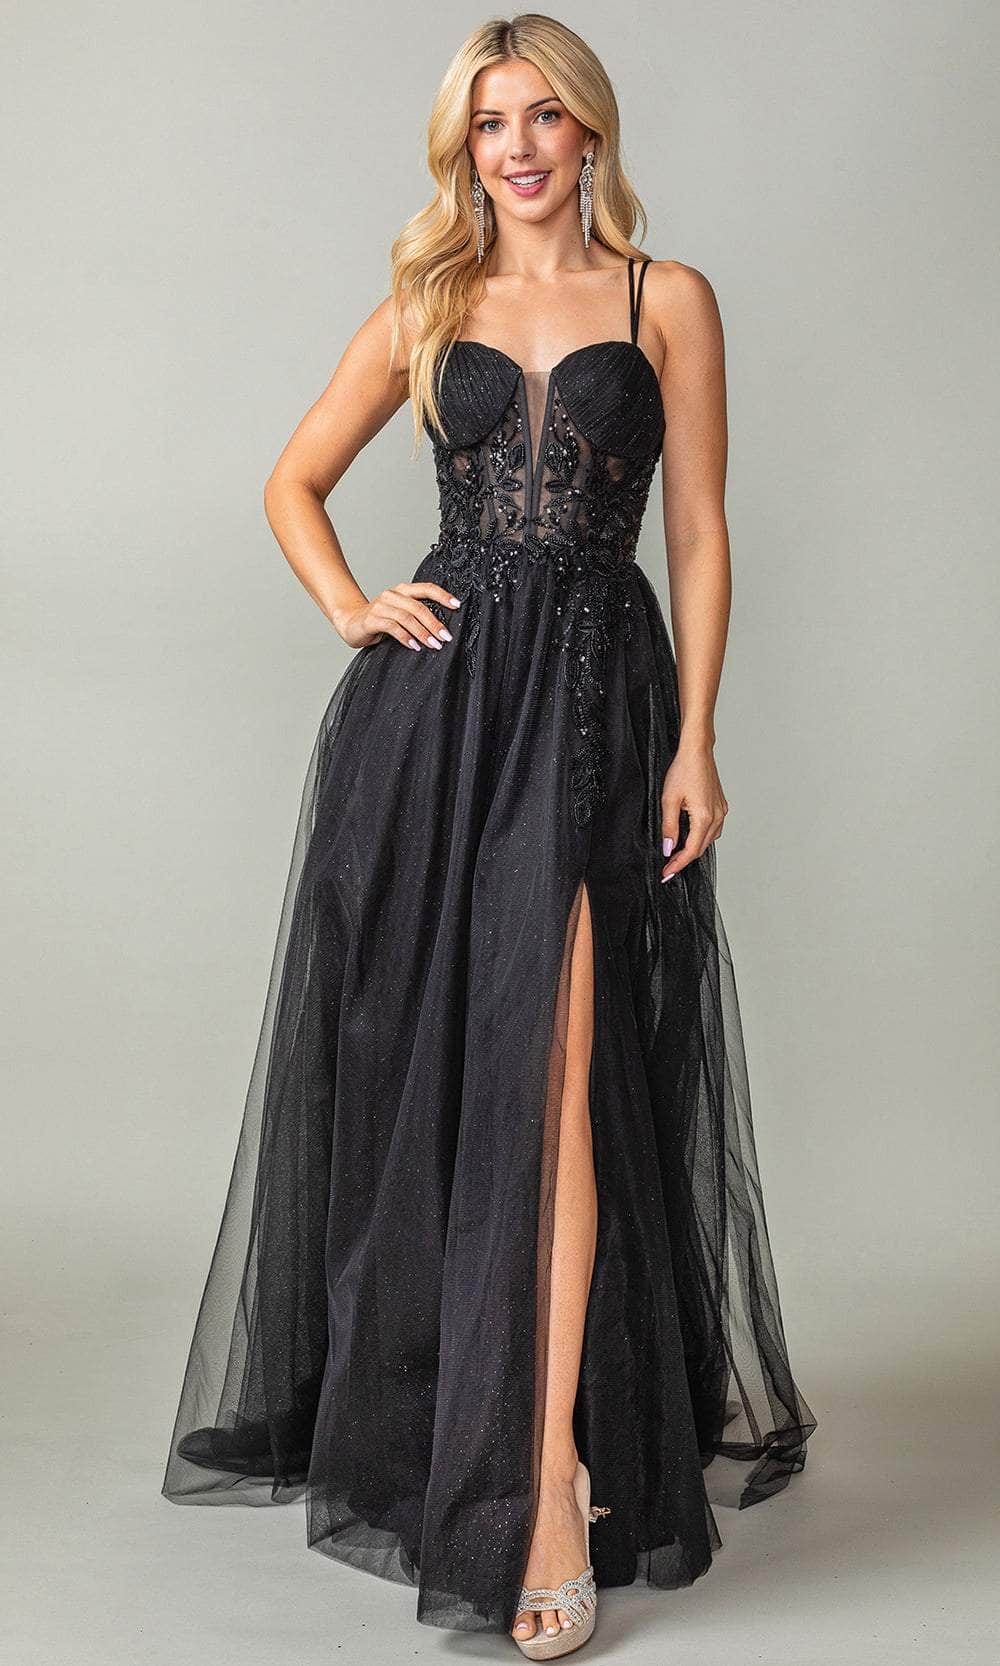 Image of Dancing Queen 4393 - Lace Appliqued Sweetheart Prom Gown